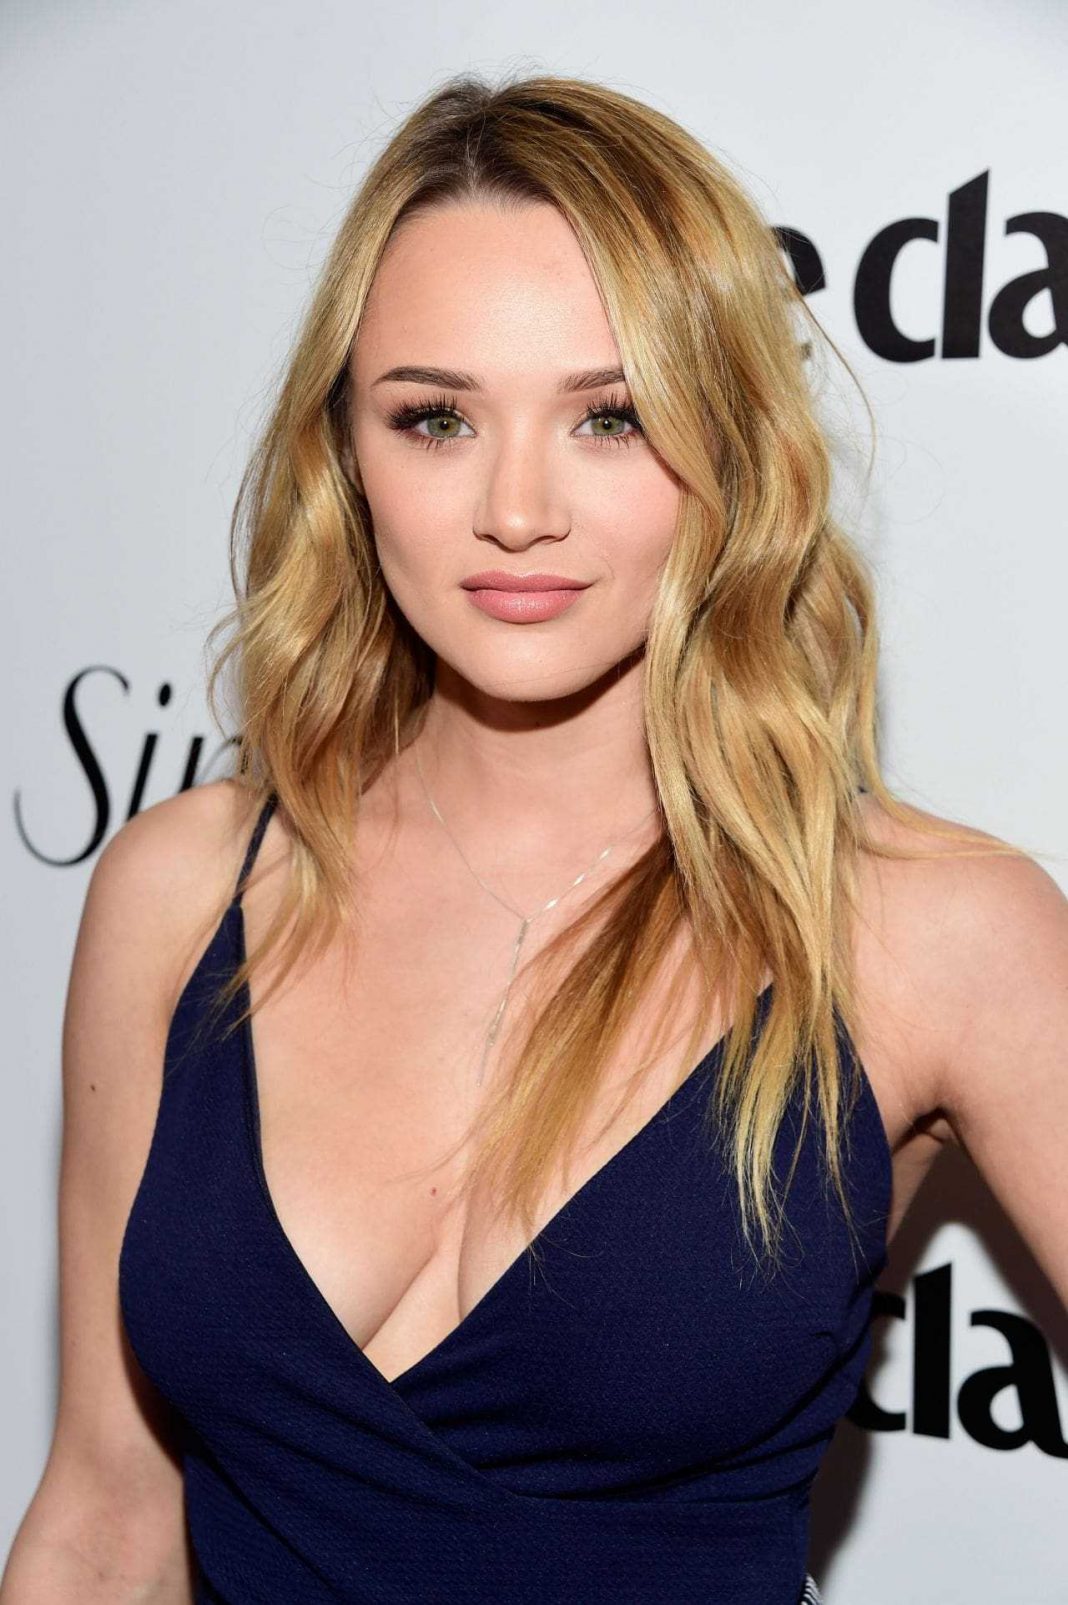 51 Hunter King Nude Pictures Display Her As A Skilled Performer 13